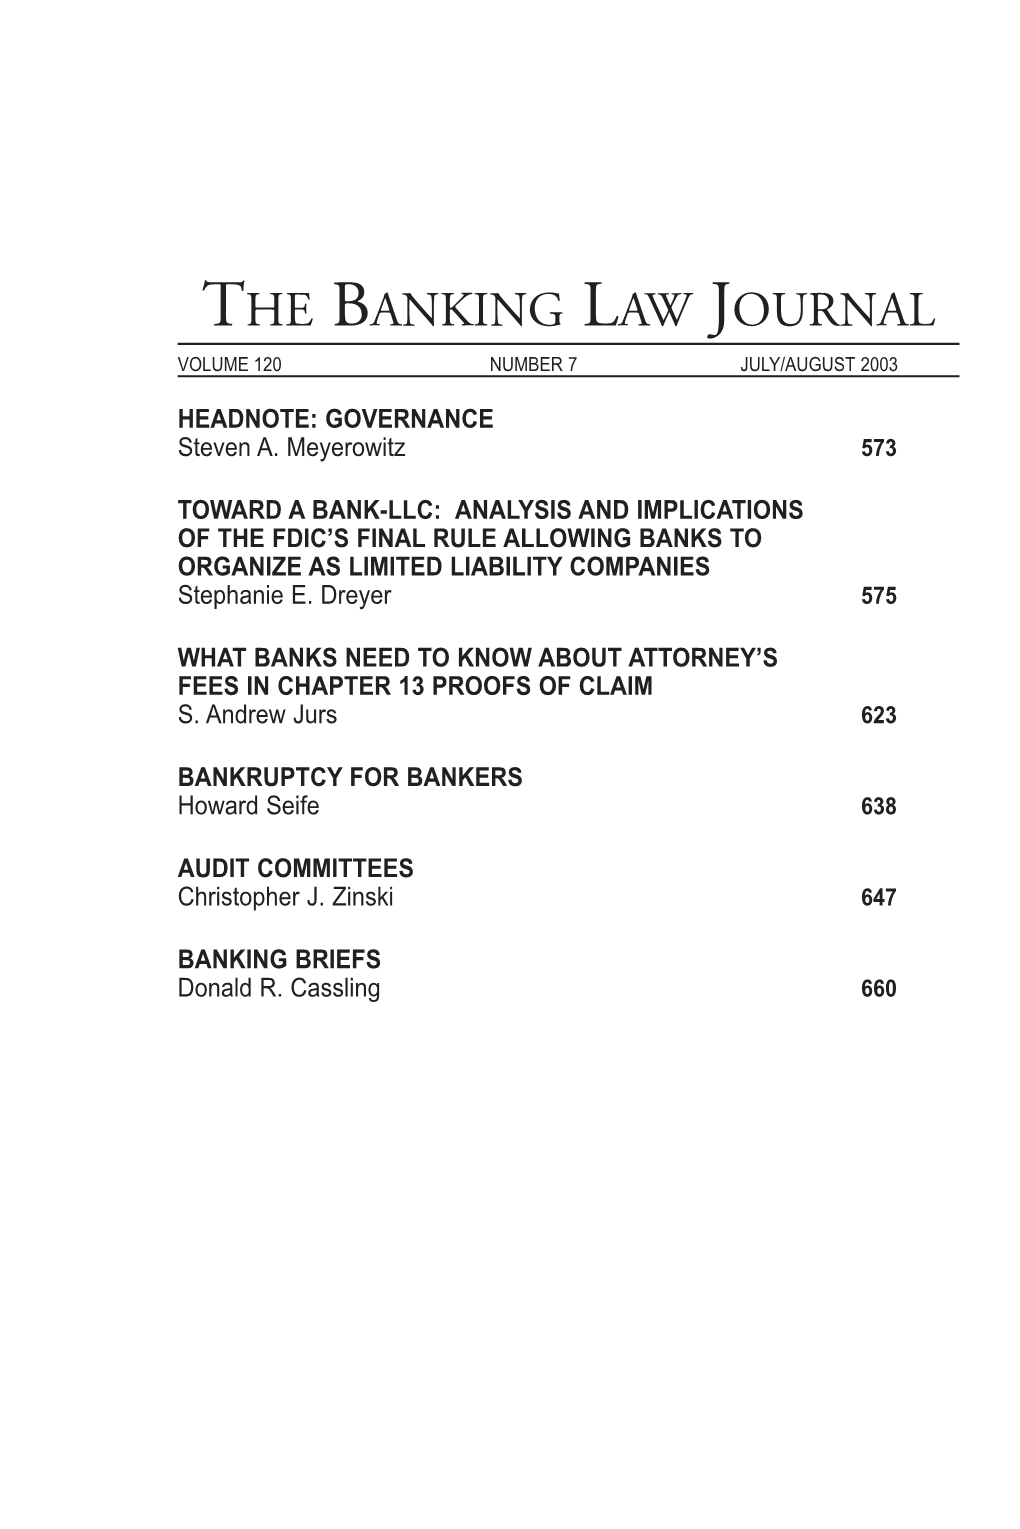 The Banking Law Journal Volume 120 Number 7 July/August 2003